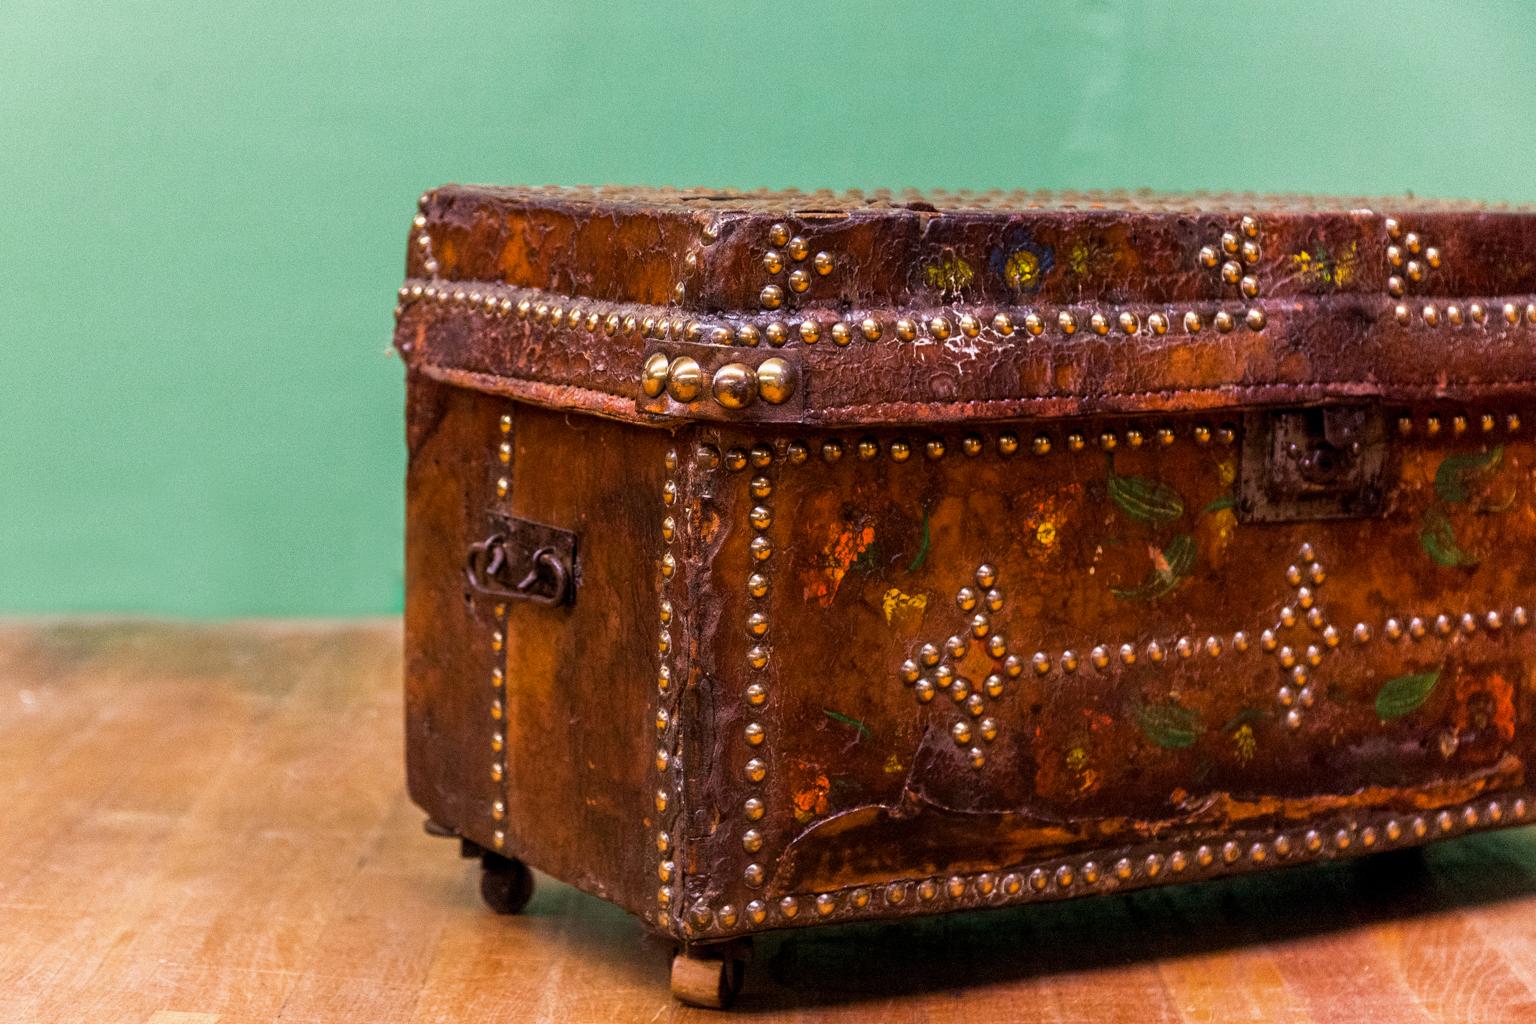 Brass studded painted leather box, has the original steel carrying handles, lock, and brass and wooden castors. There is a three inch long old shrinkage separation on the side.